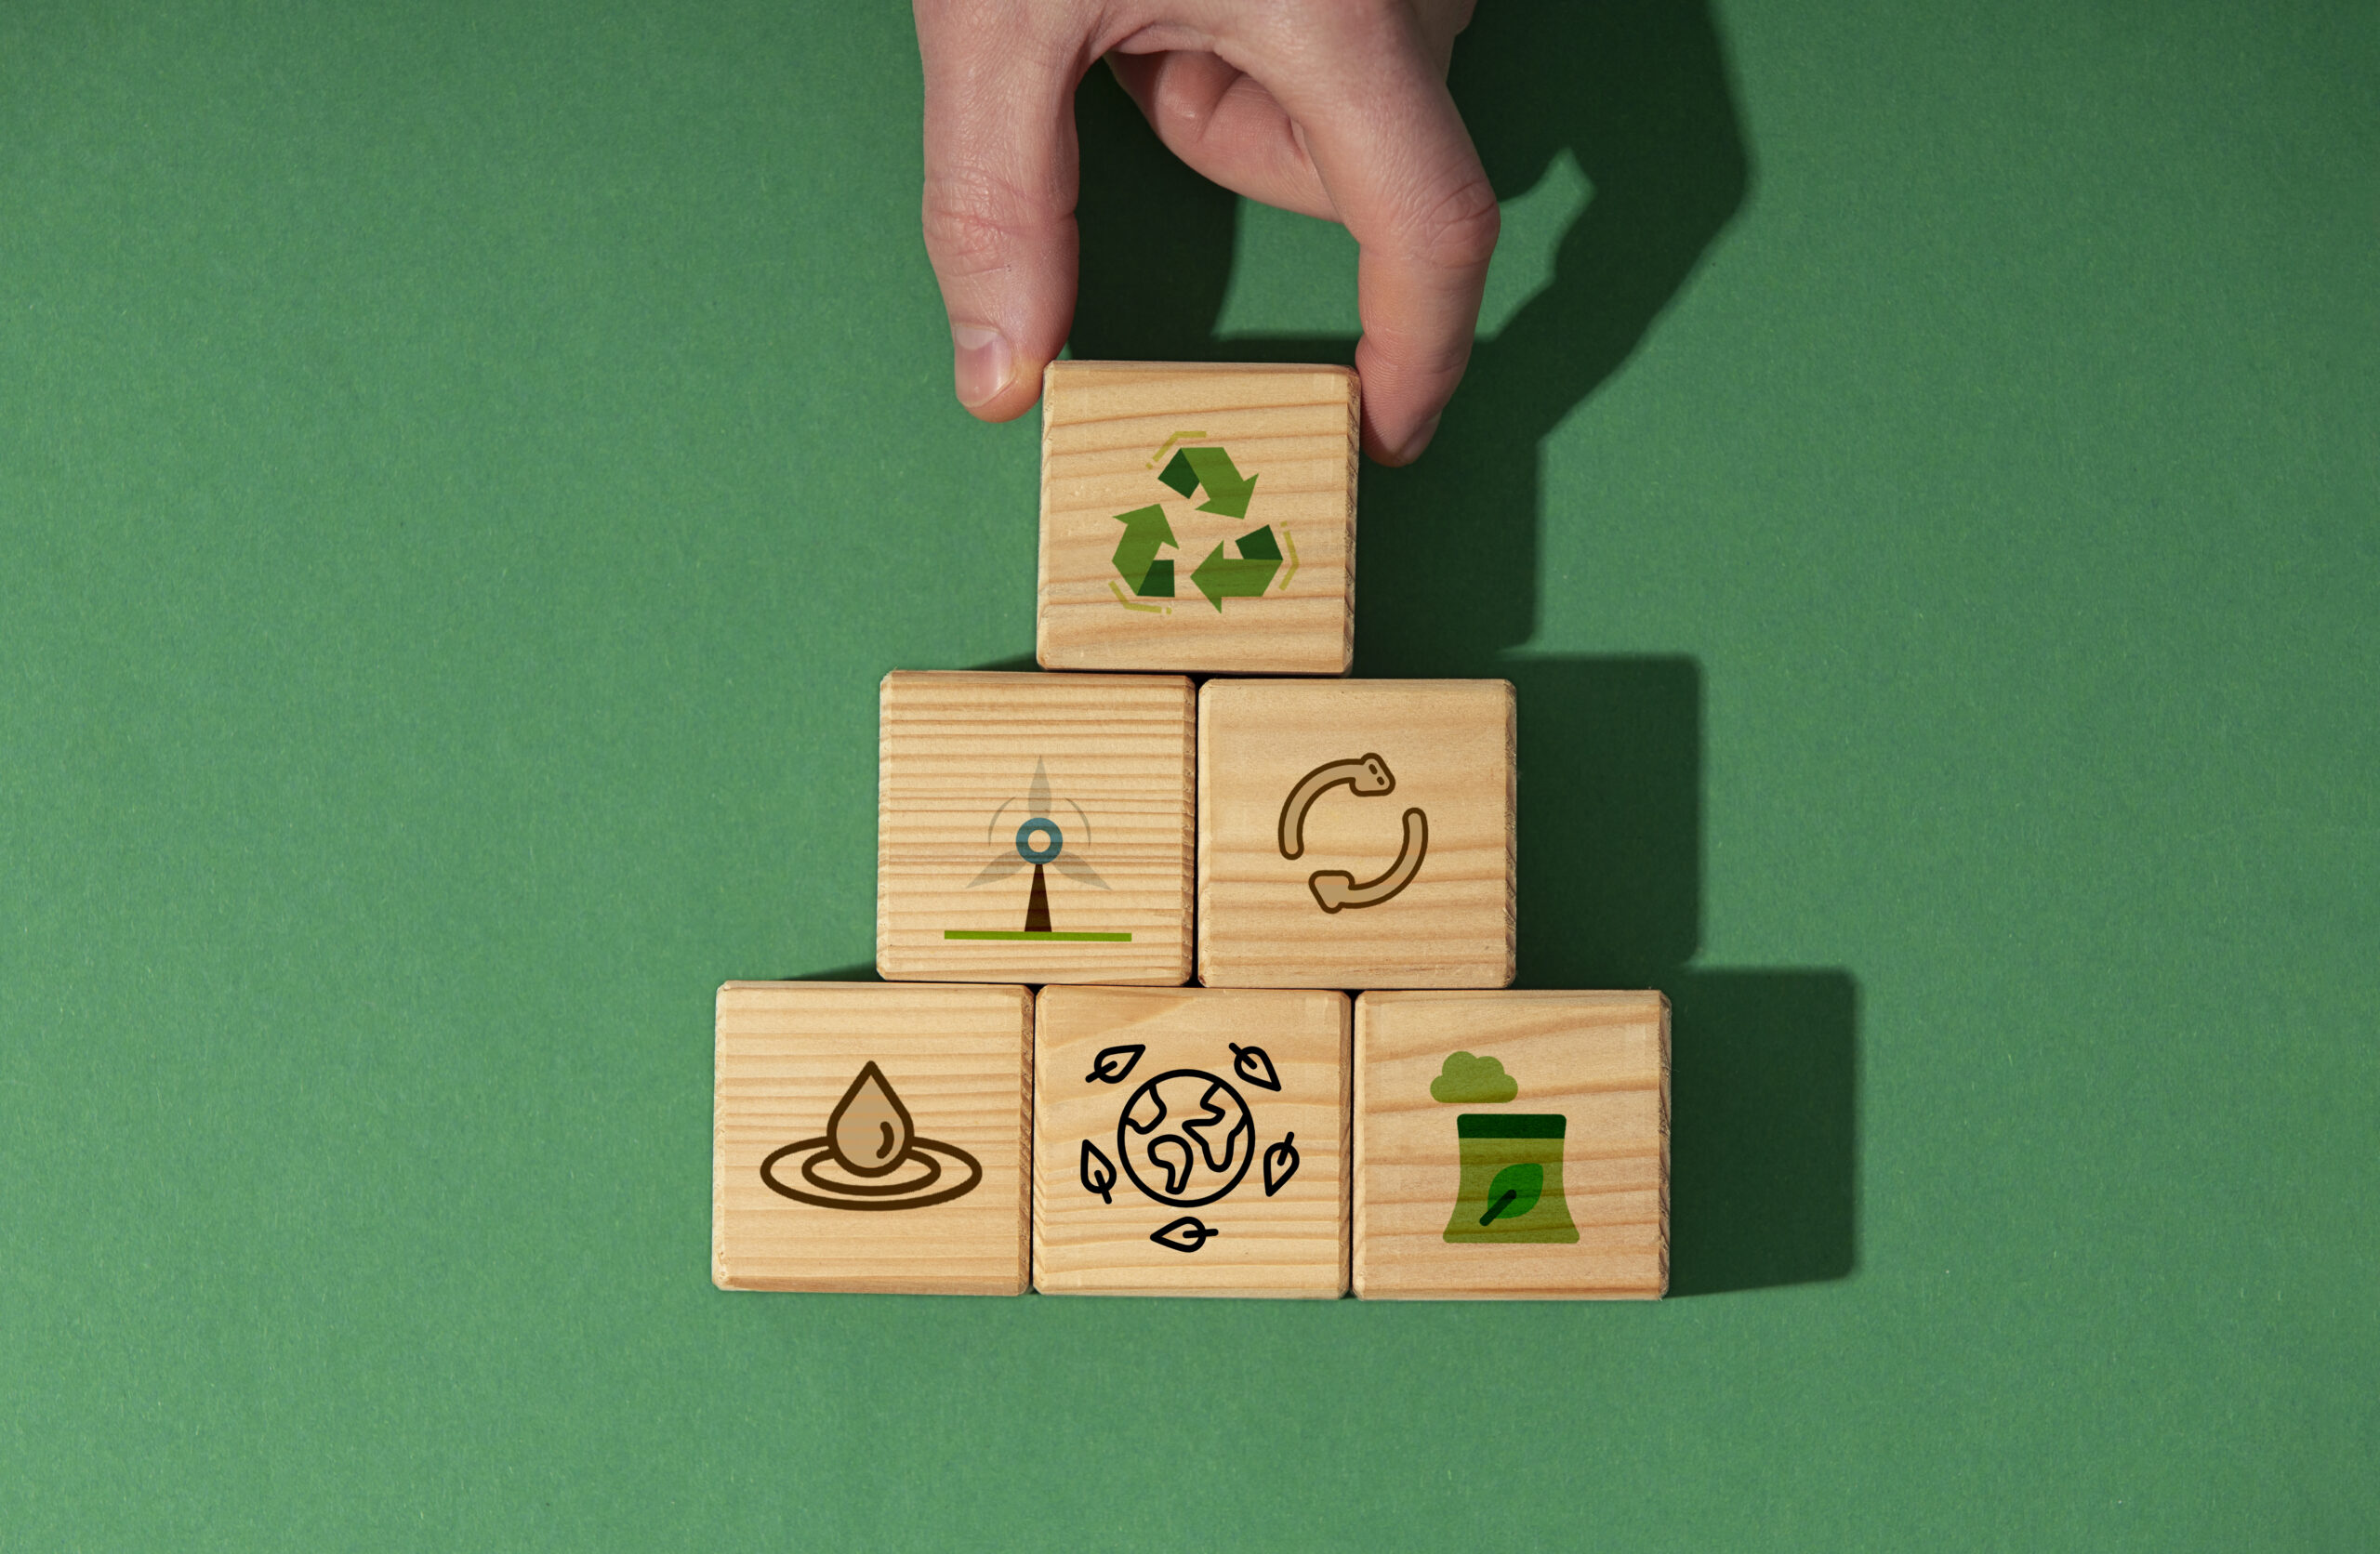 Wooden building blocks on a green background. Lying flat, face up to the camera, stacked on top of each other and tiered. Each block has a different illustrated symbol representing an aspect of sustainability.